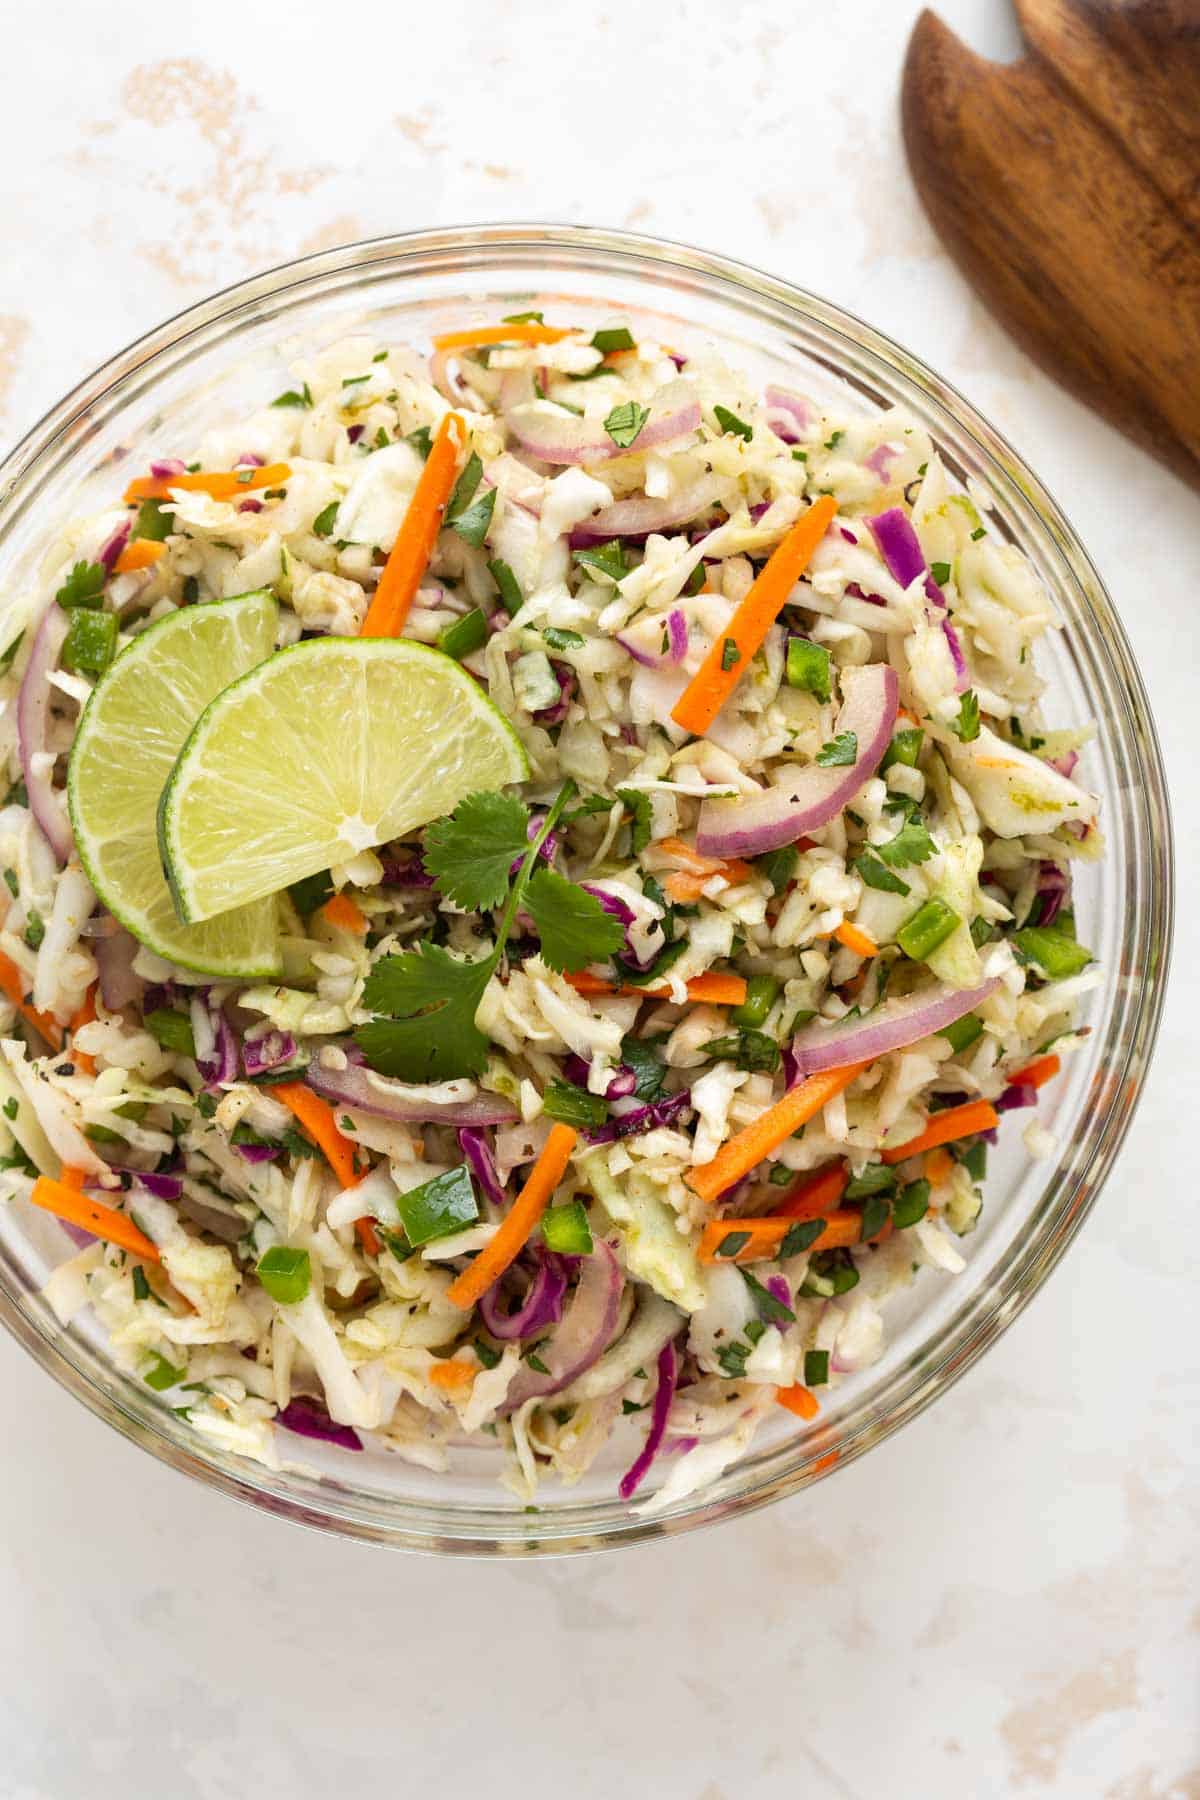 Overhead view of Mexican coleslaw garnished with lime and cilantro in a bowl.